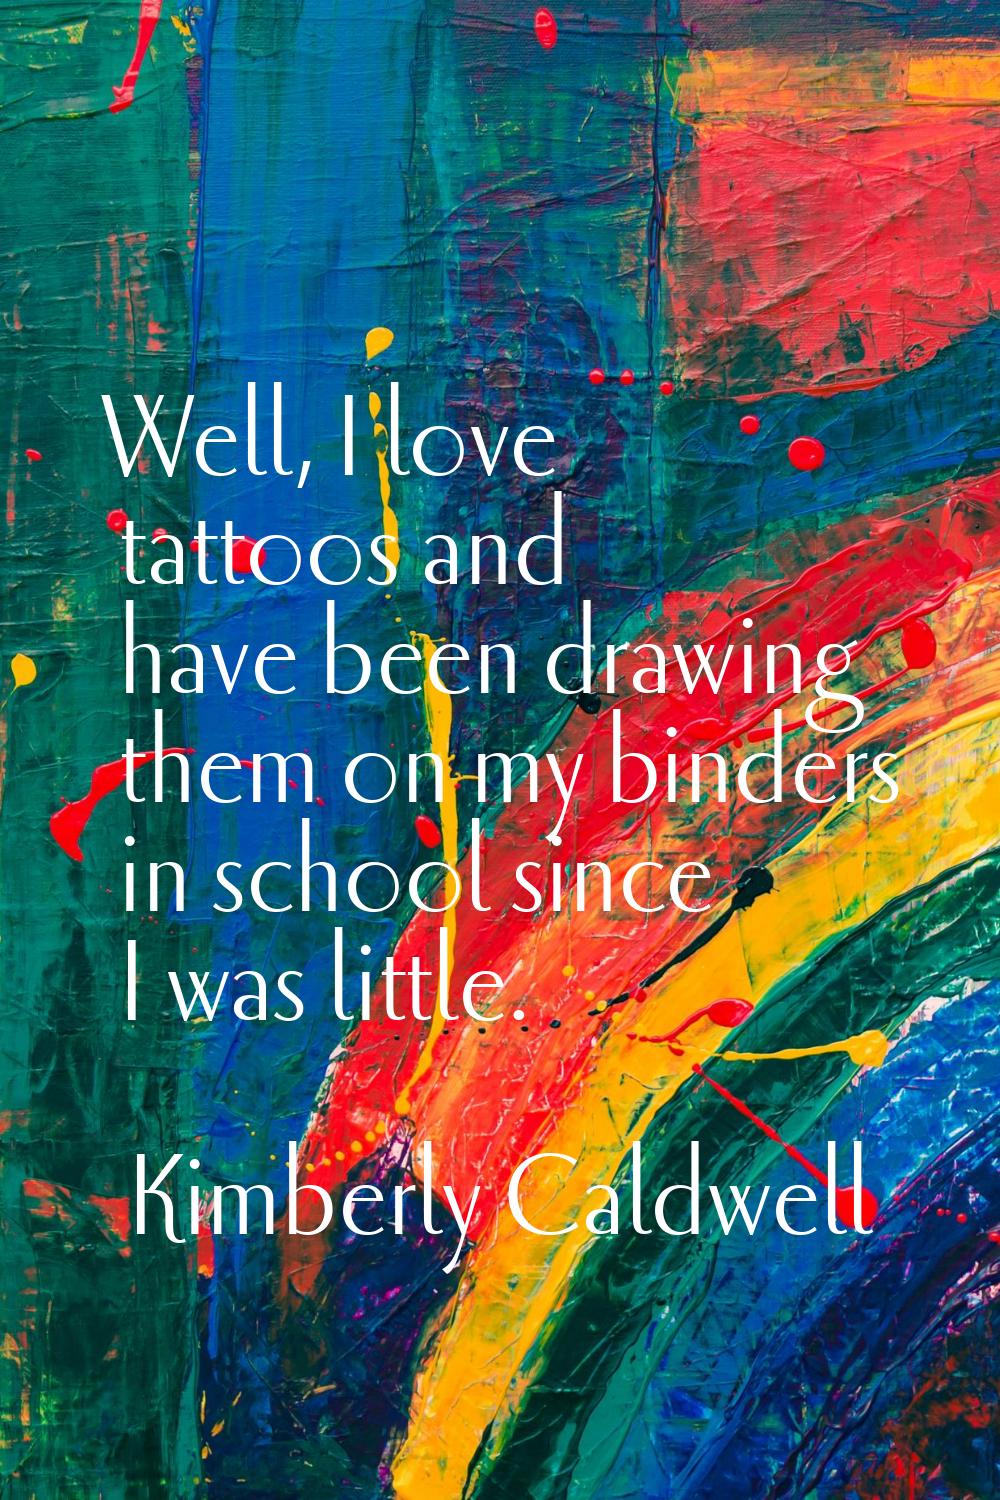 Well, I love tattoos and have been drawing them on my binders in school since I was little.